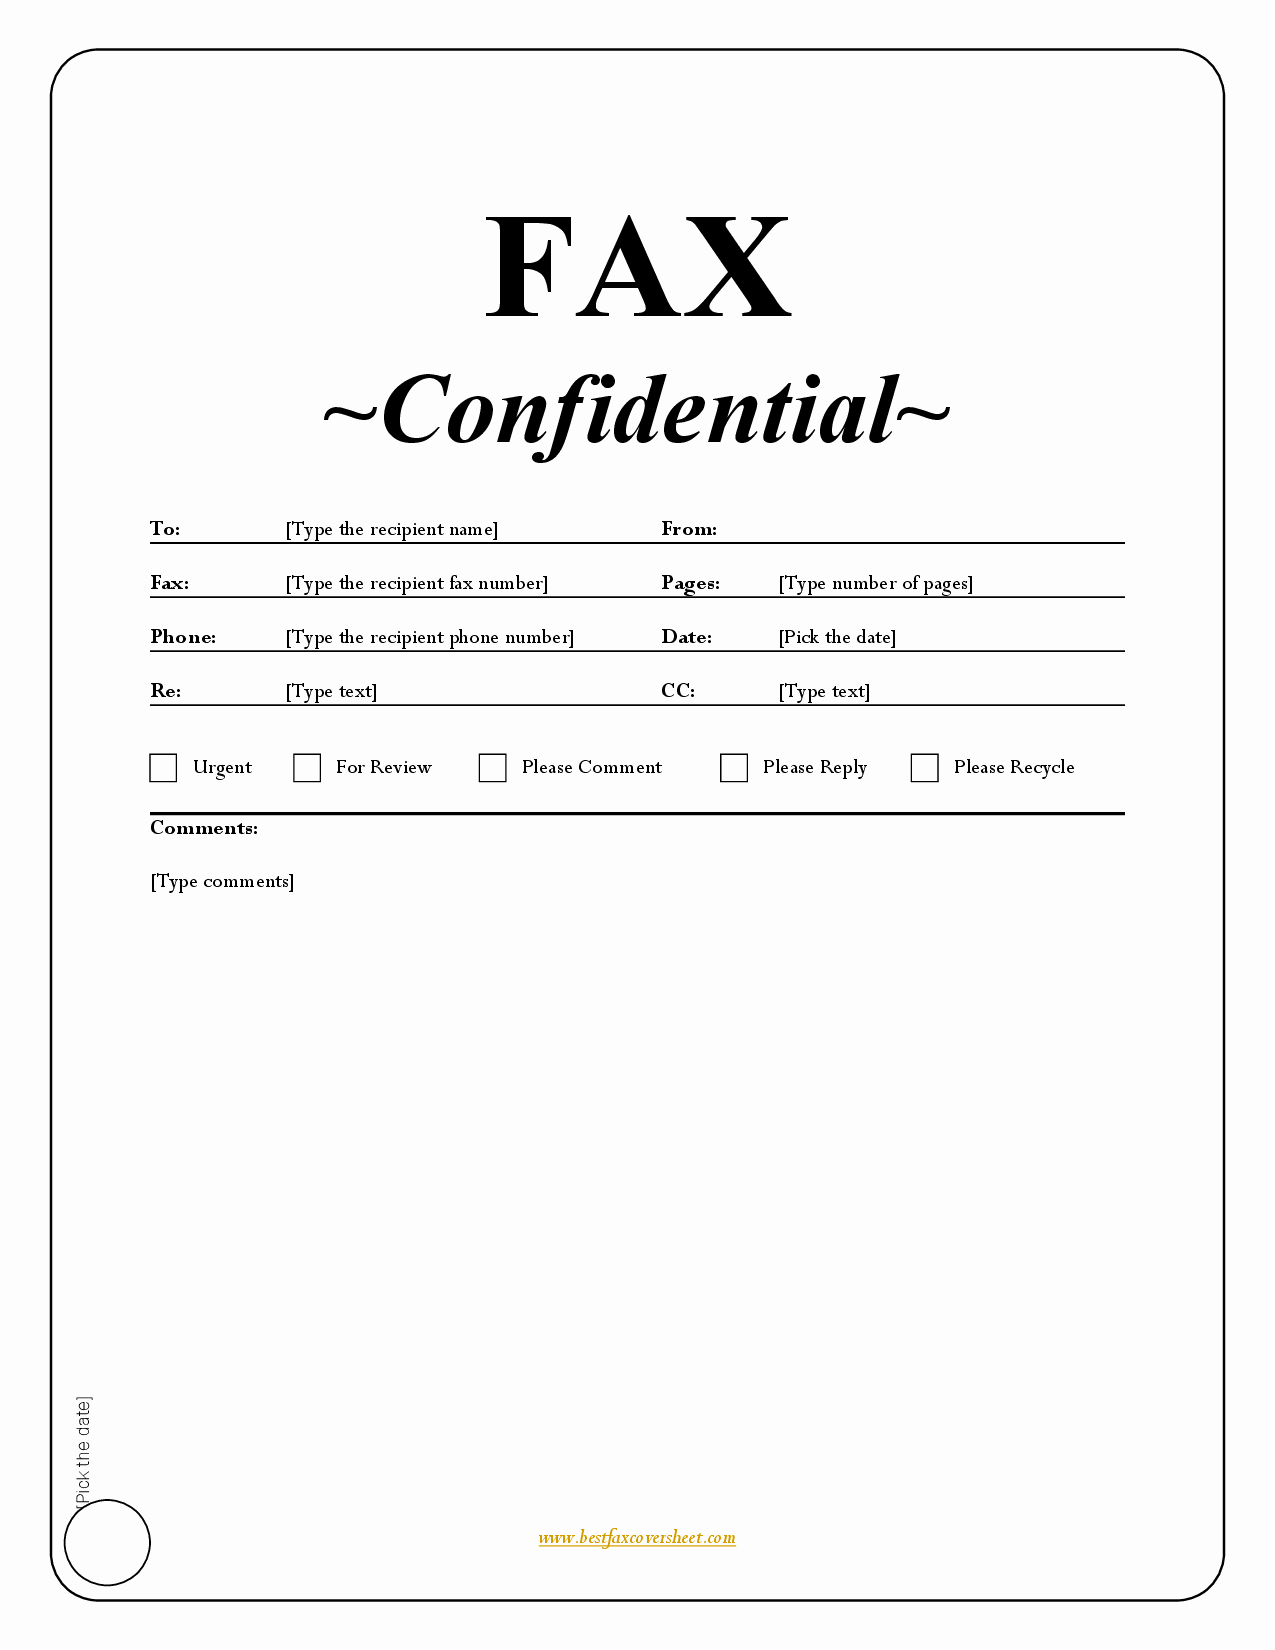 Examples Of Fax Cover Sheets Luxury Fax Sample Cover Sheet Template Printable Page